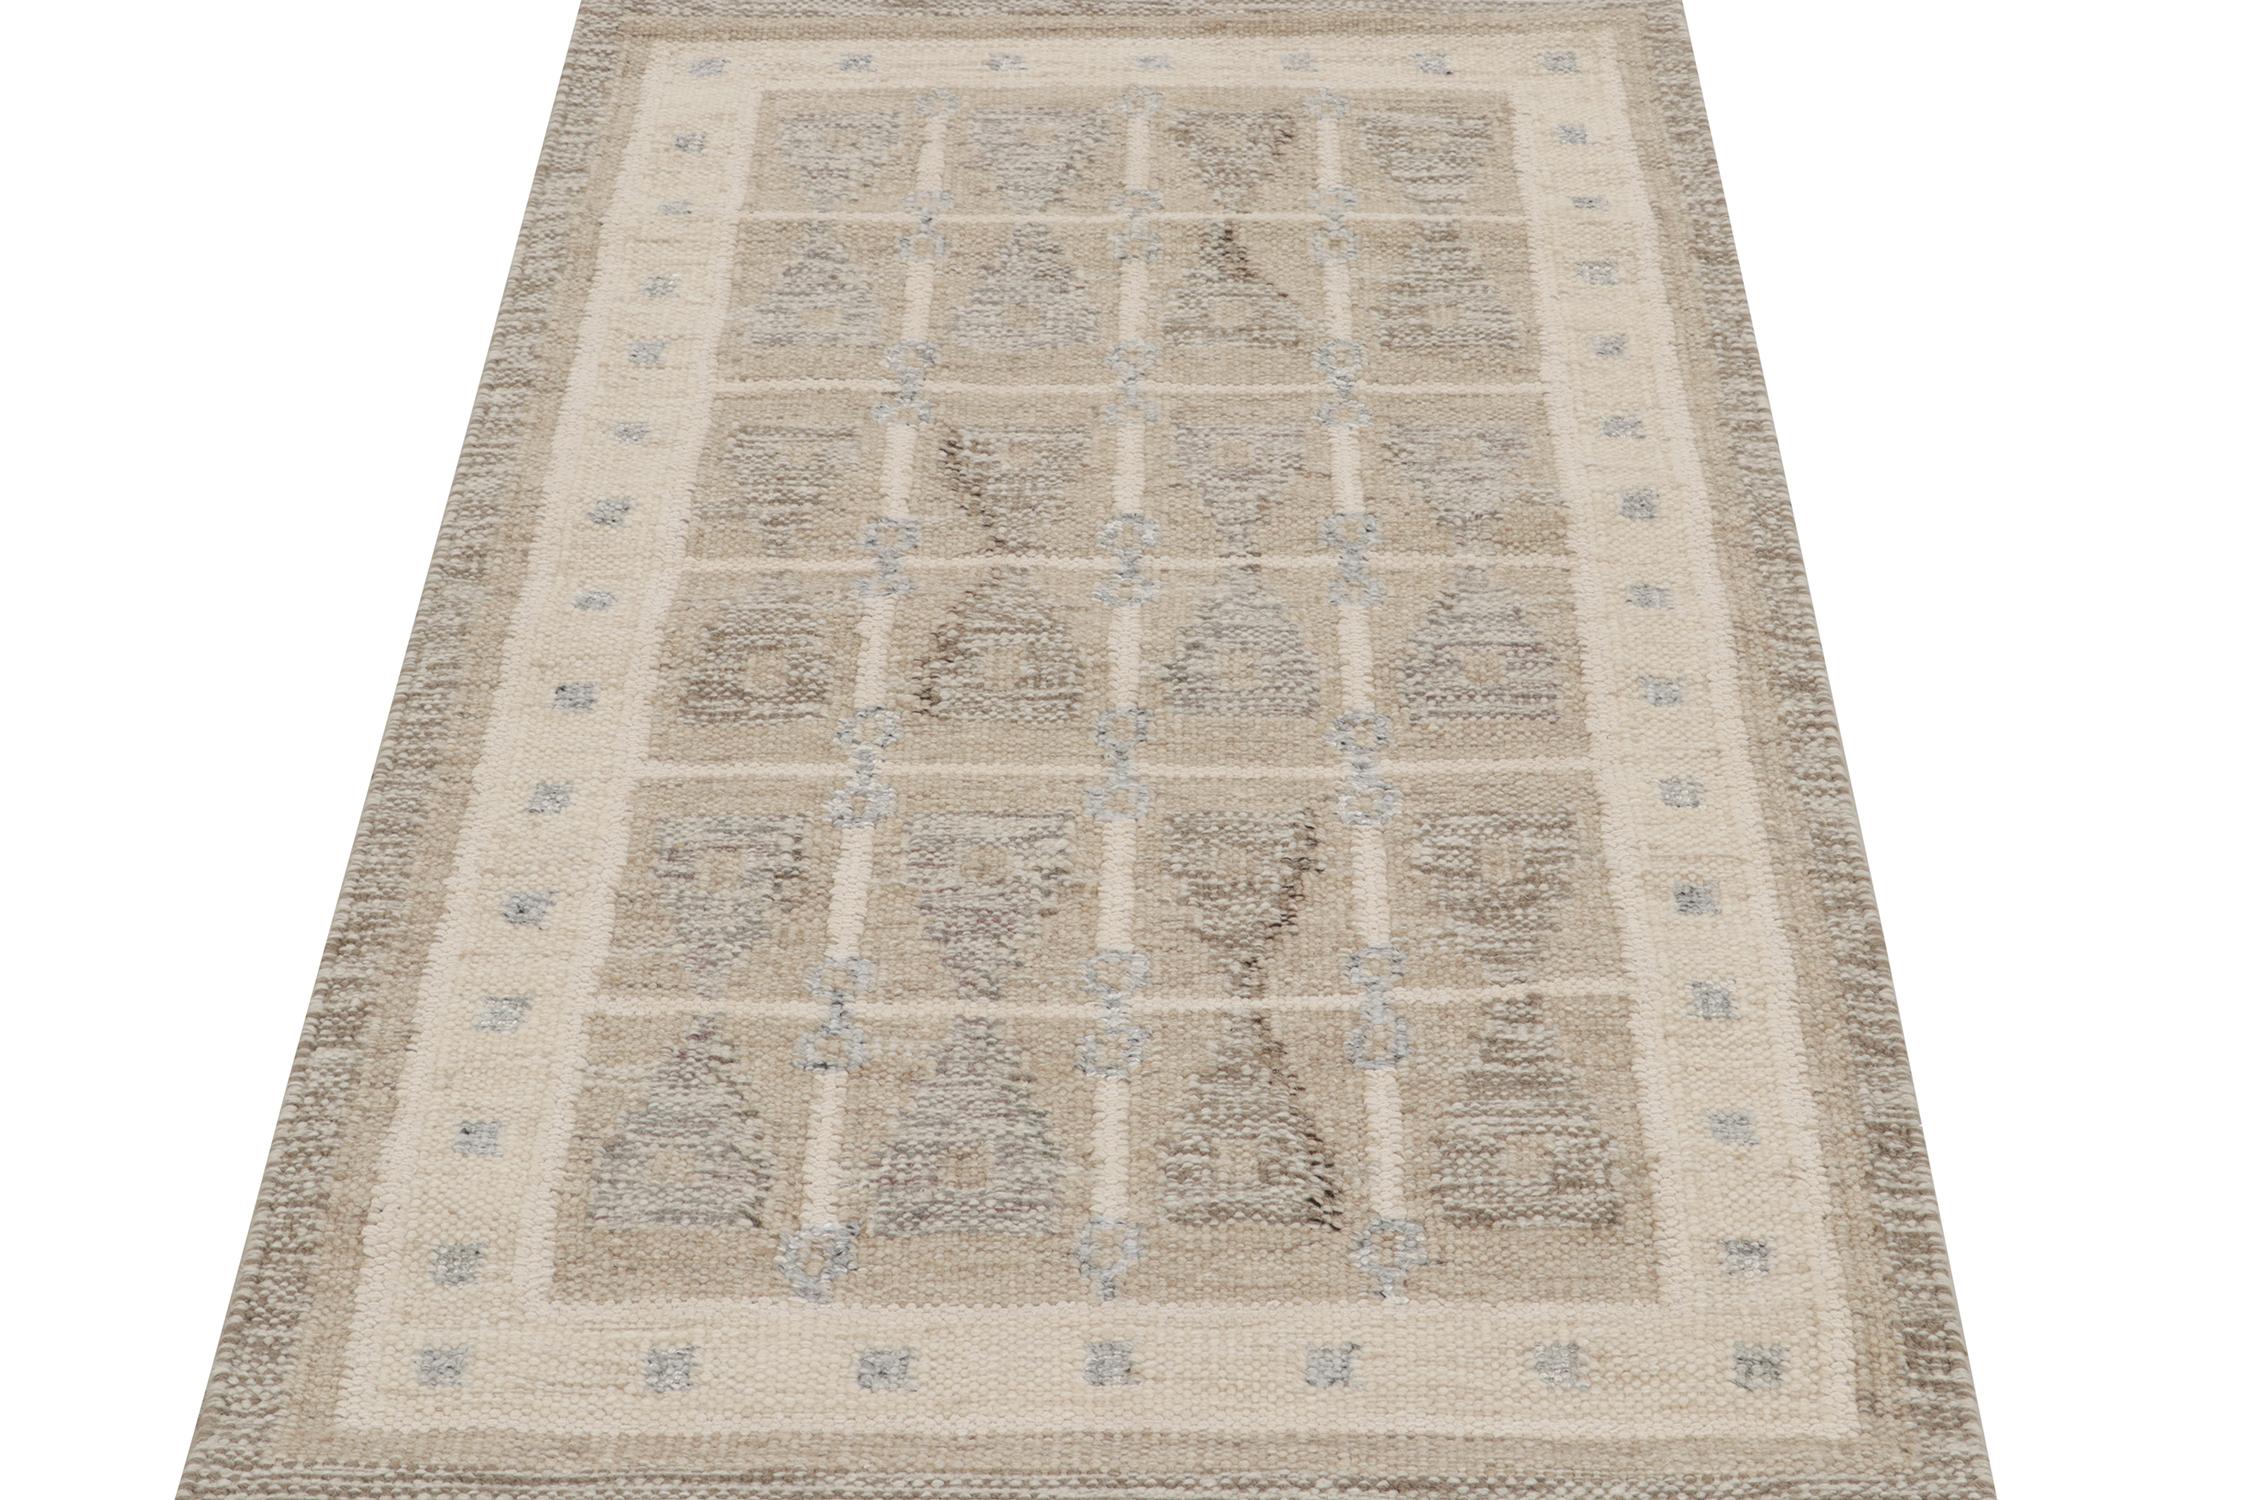 A smart 3x5 Swedish style kilim from the “Nu” line of Rug & Kilim’s award-winning Scandinavian flat weave collection. Handwoven in wool. 
On the design: 
This rug enjoys a natural sense of movement with hourglass geometric patterns in beige-brown